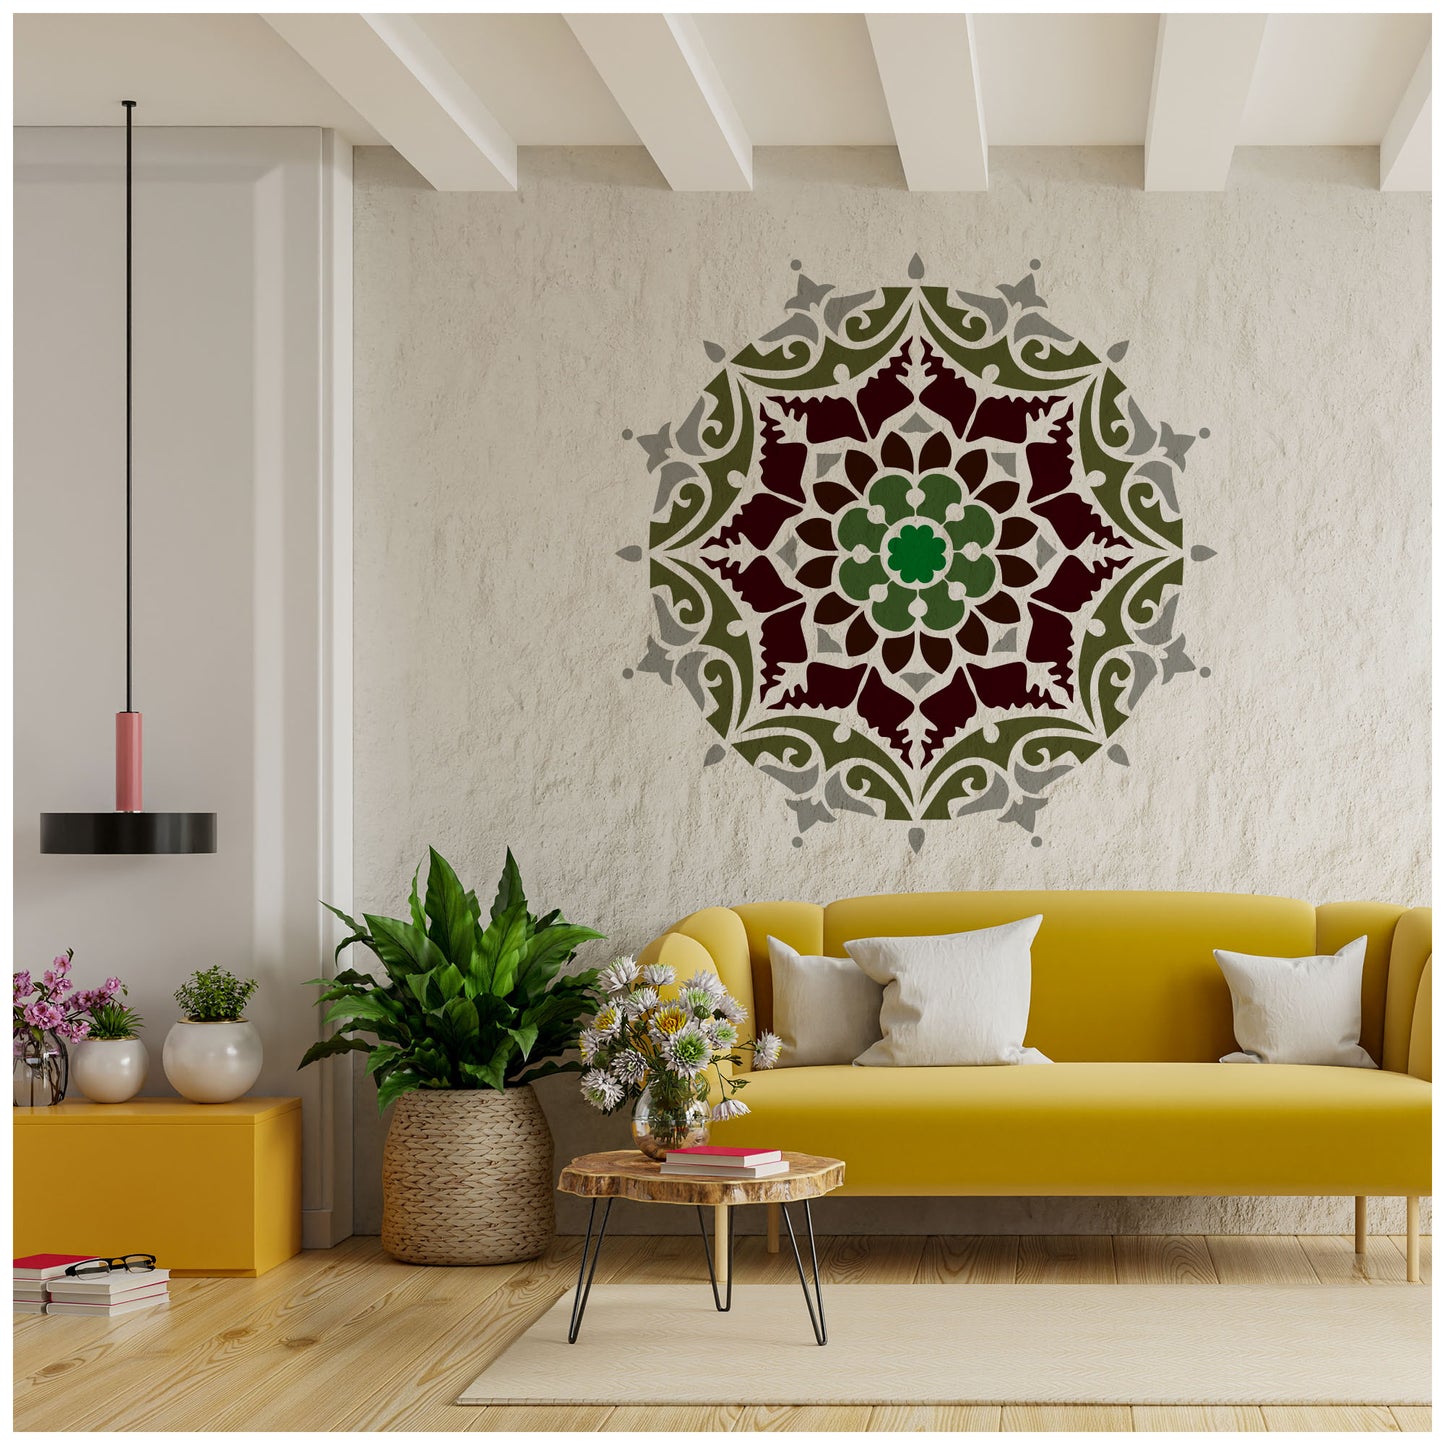 Heavenly Mandala Design Stencil for Wall Painting (KDMD1491)